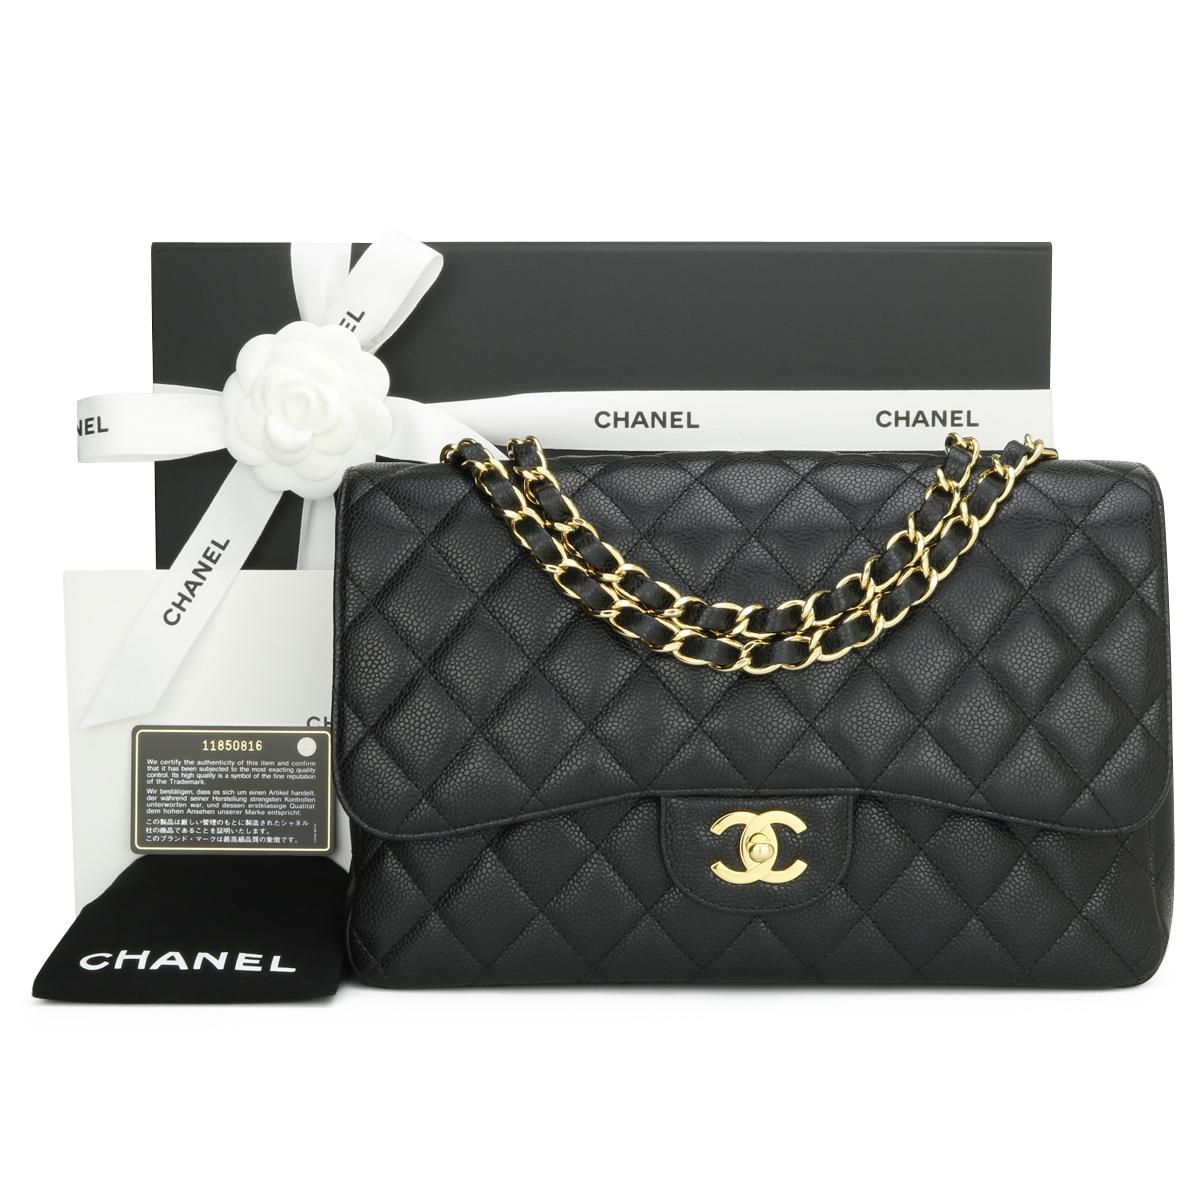 CHANEL Classic Single Flap Jumbo Bag Black Caviar with 24k Gold Plated Hardware 2007.

This stunning bag is in excellent condition, the bag still holds its original shape, and the hardware is still very shiny.

It is such a lightweight bag compared